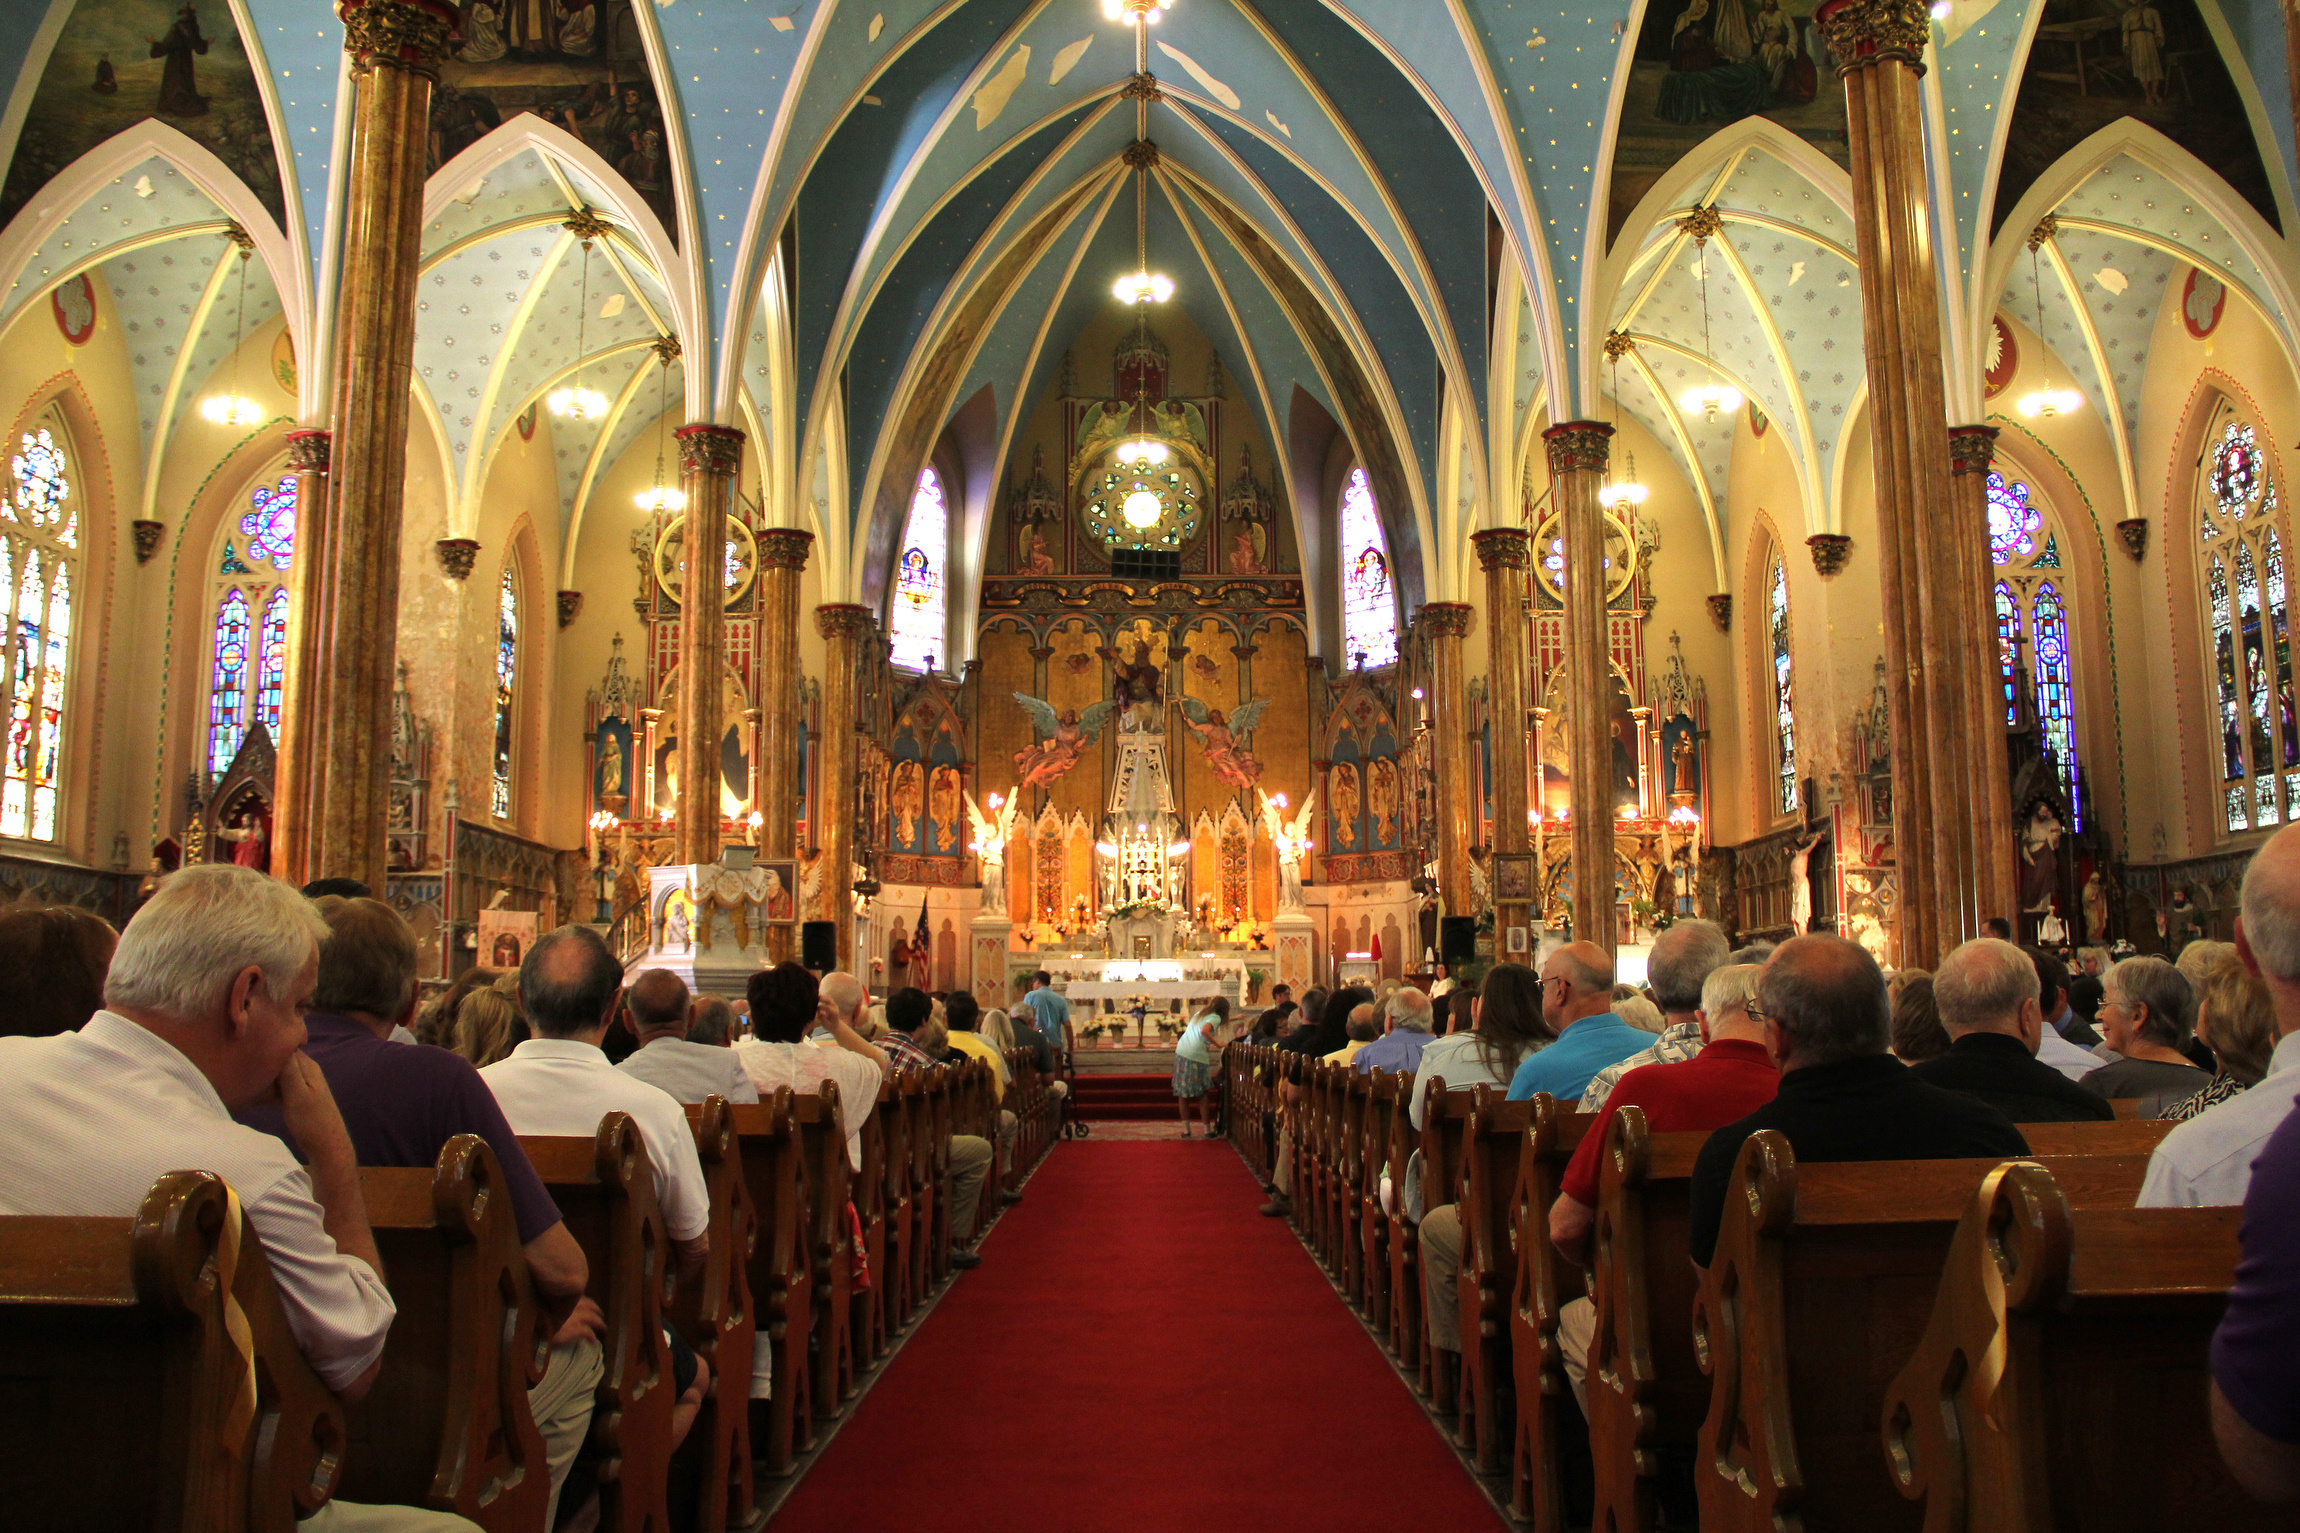 More than 2,000 people attend Mass at historic St. Albertus Church in Detro...